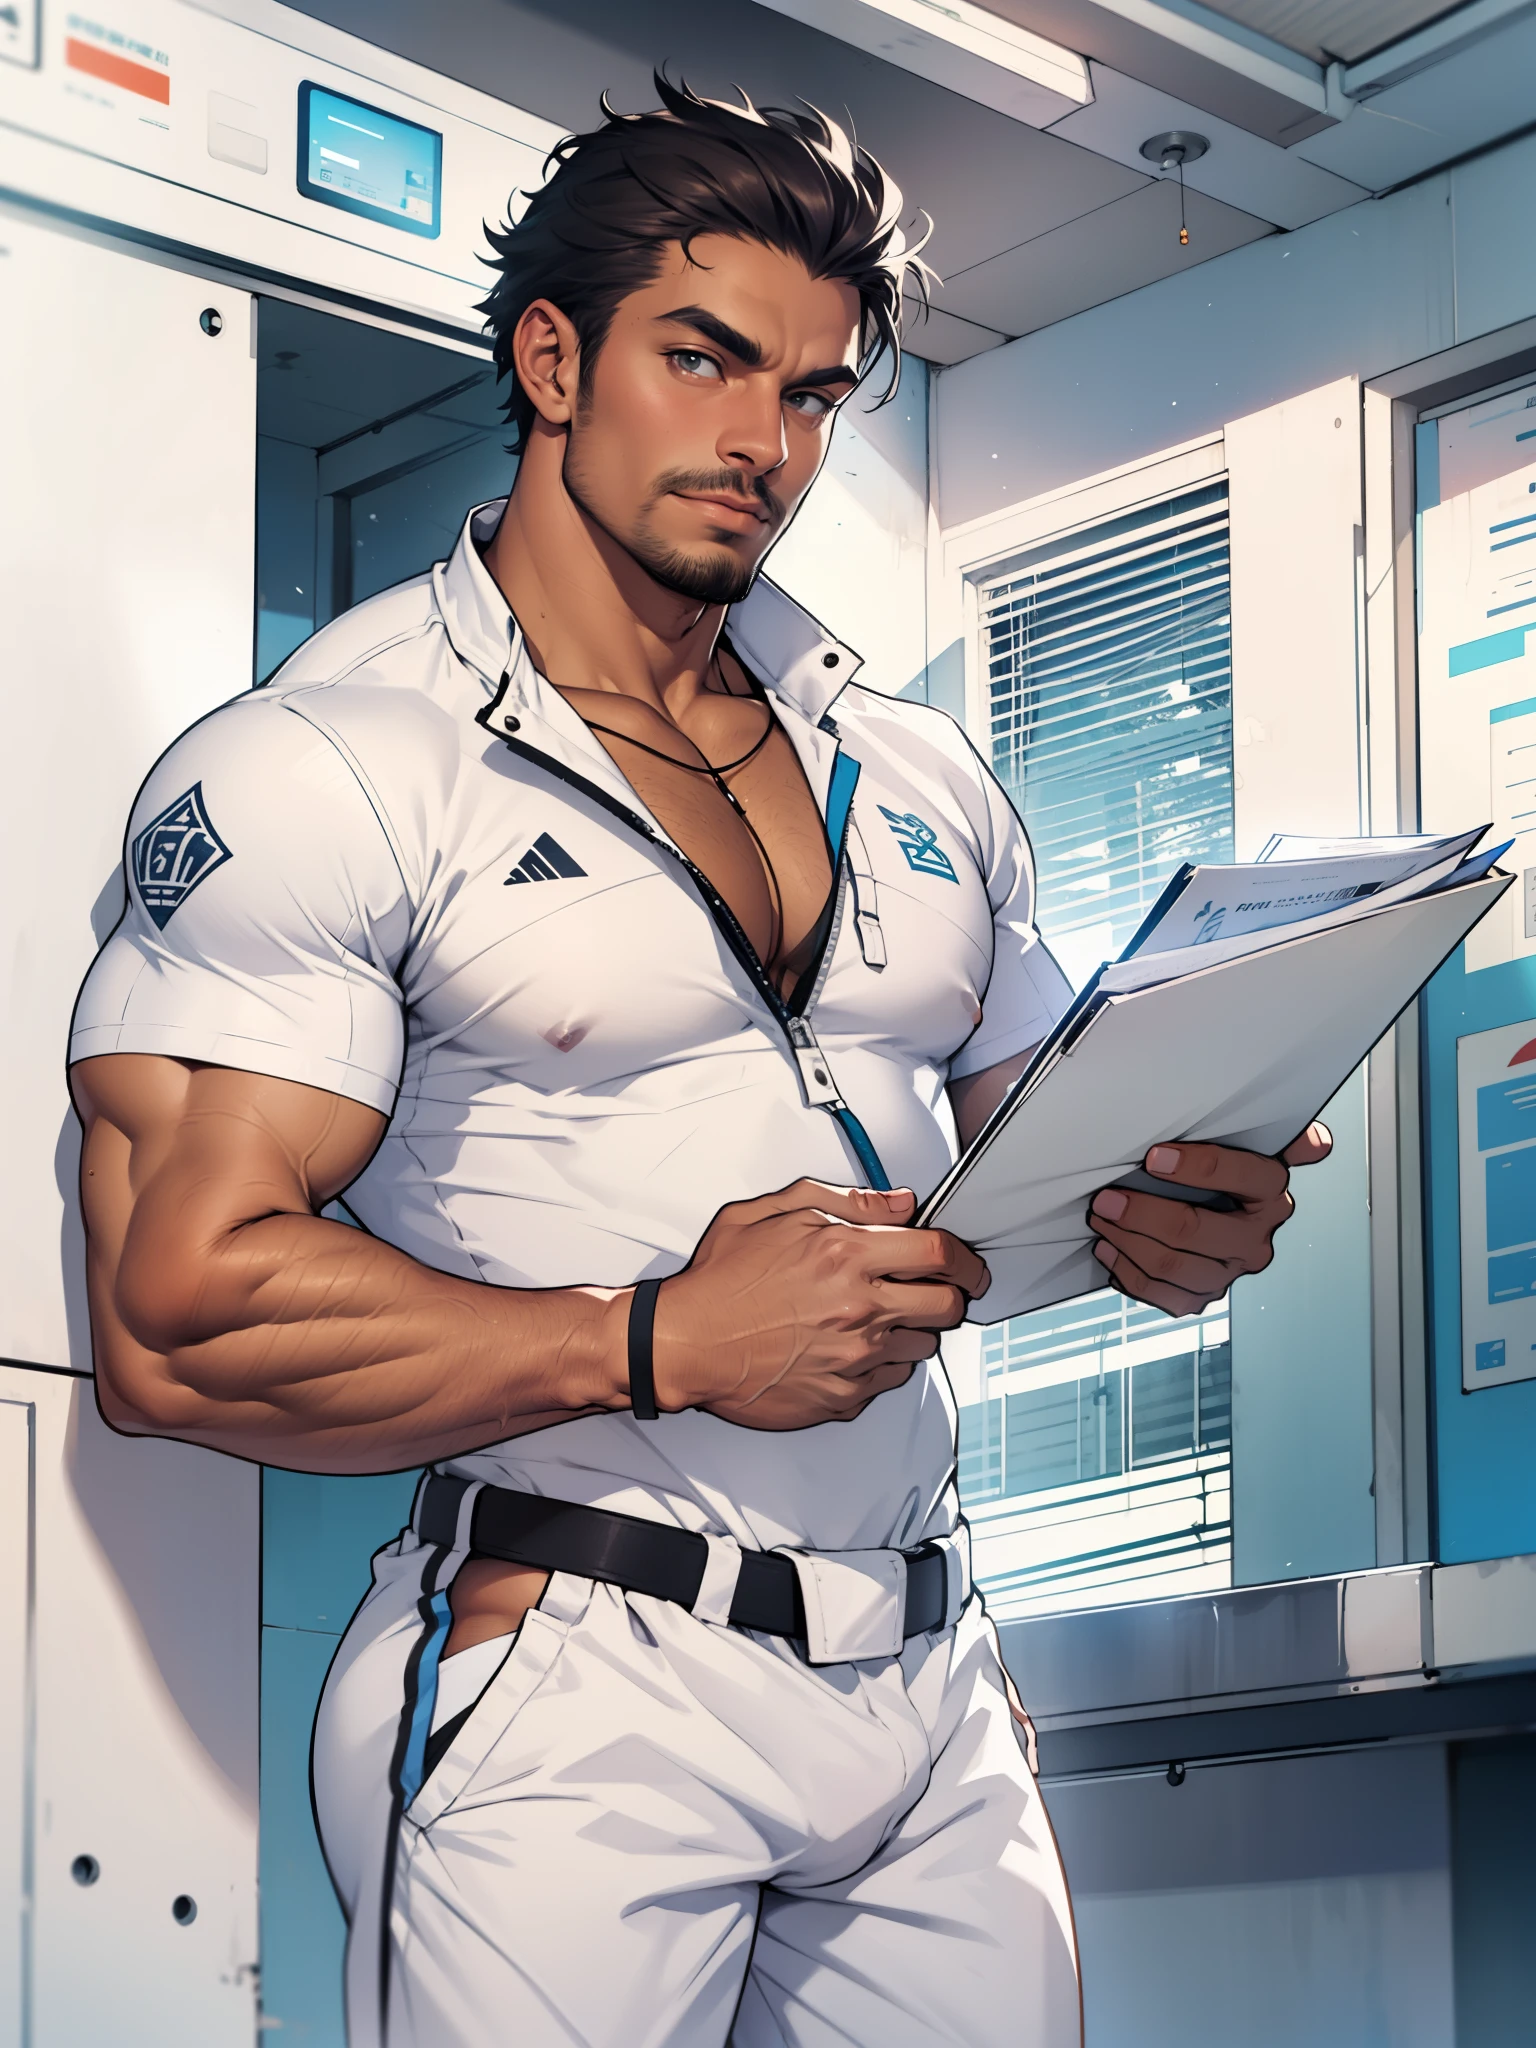 sexy mature daddy, skin tanned, Big bulge, darker skin, stubbles, muscular, skilled architect, Plant in hand, modern construction site, visionary look